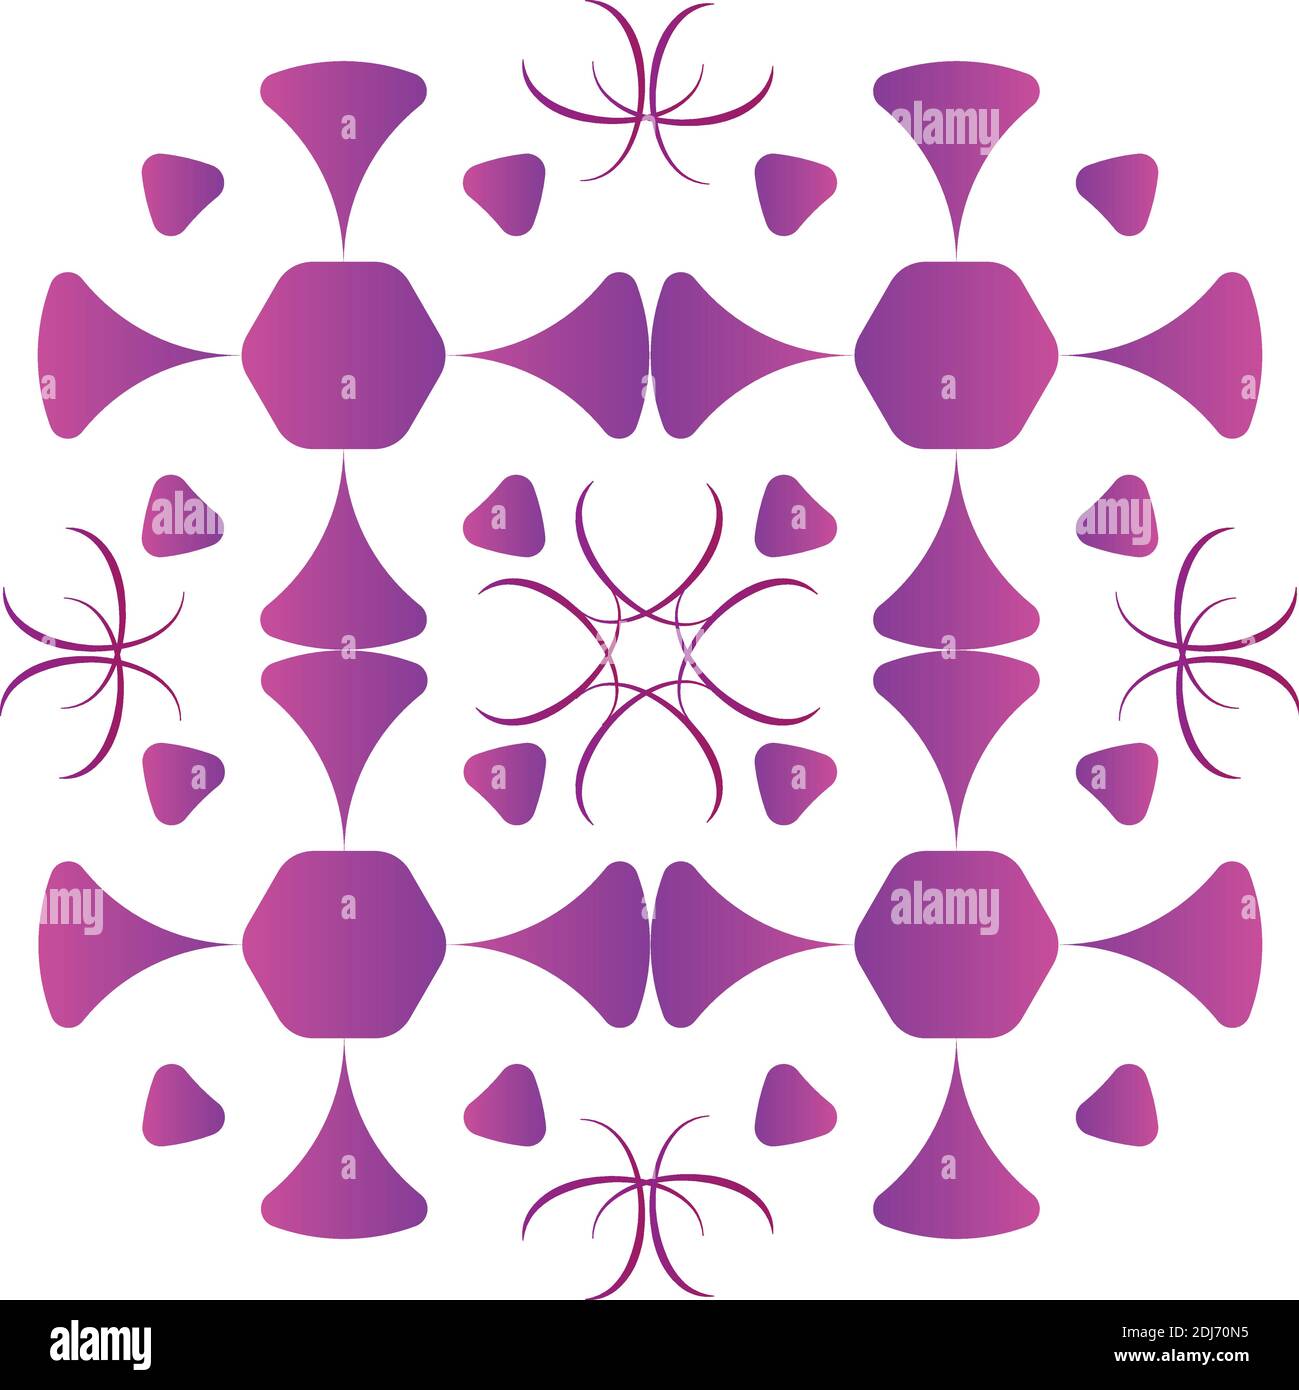 a pattern created with arcs and regular hexagons Stock Vector